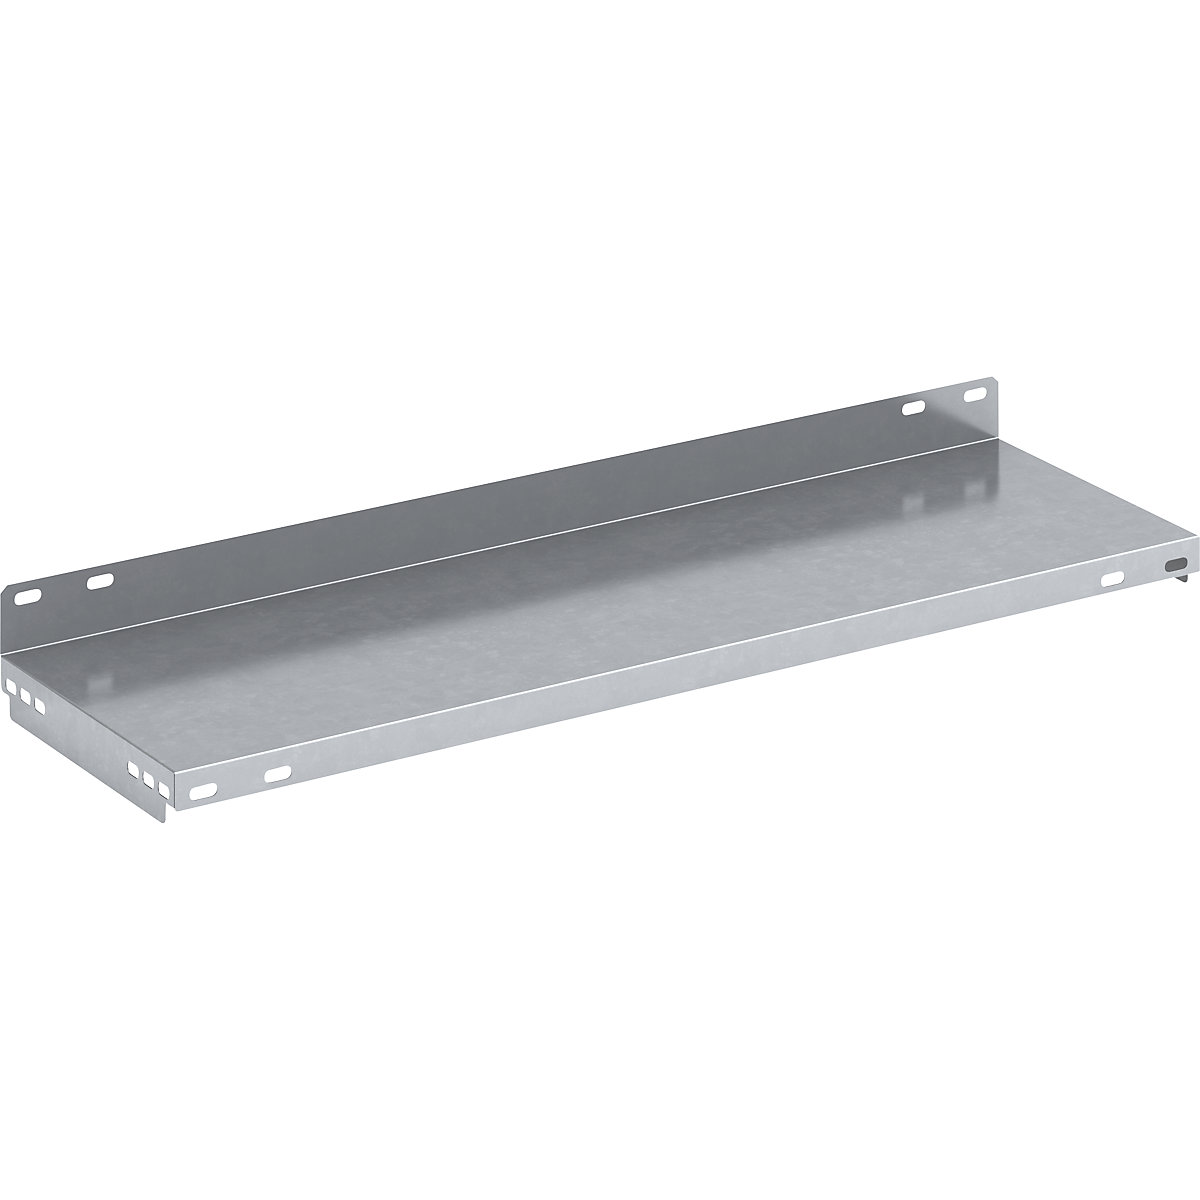 Shelf with supports – hofe